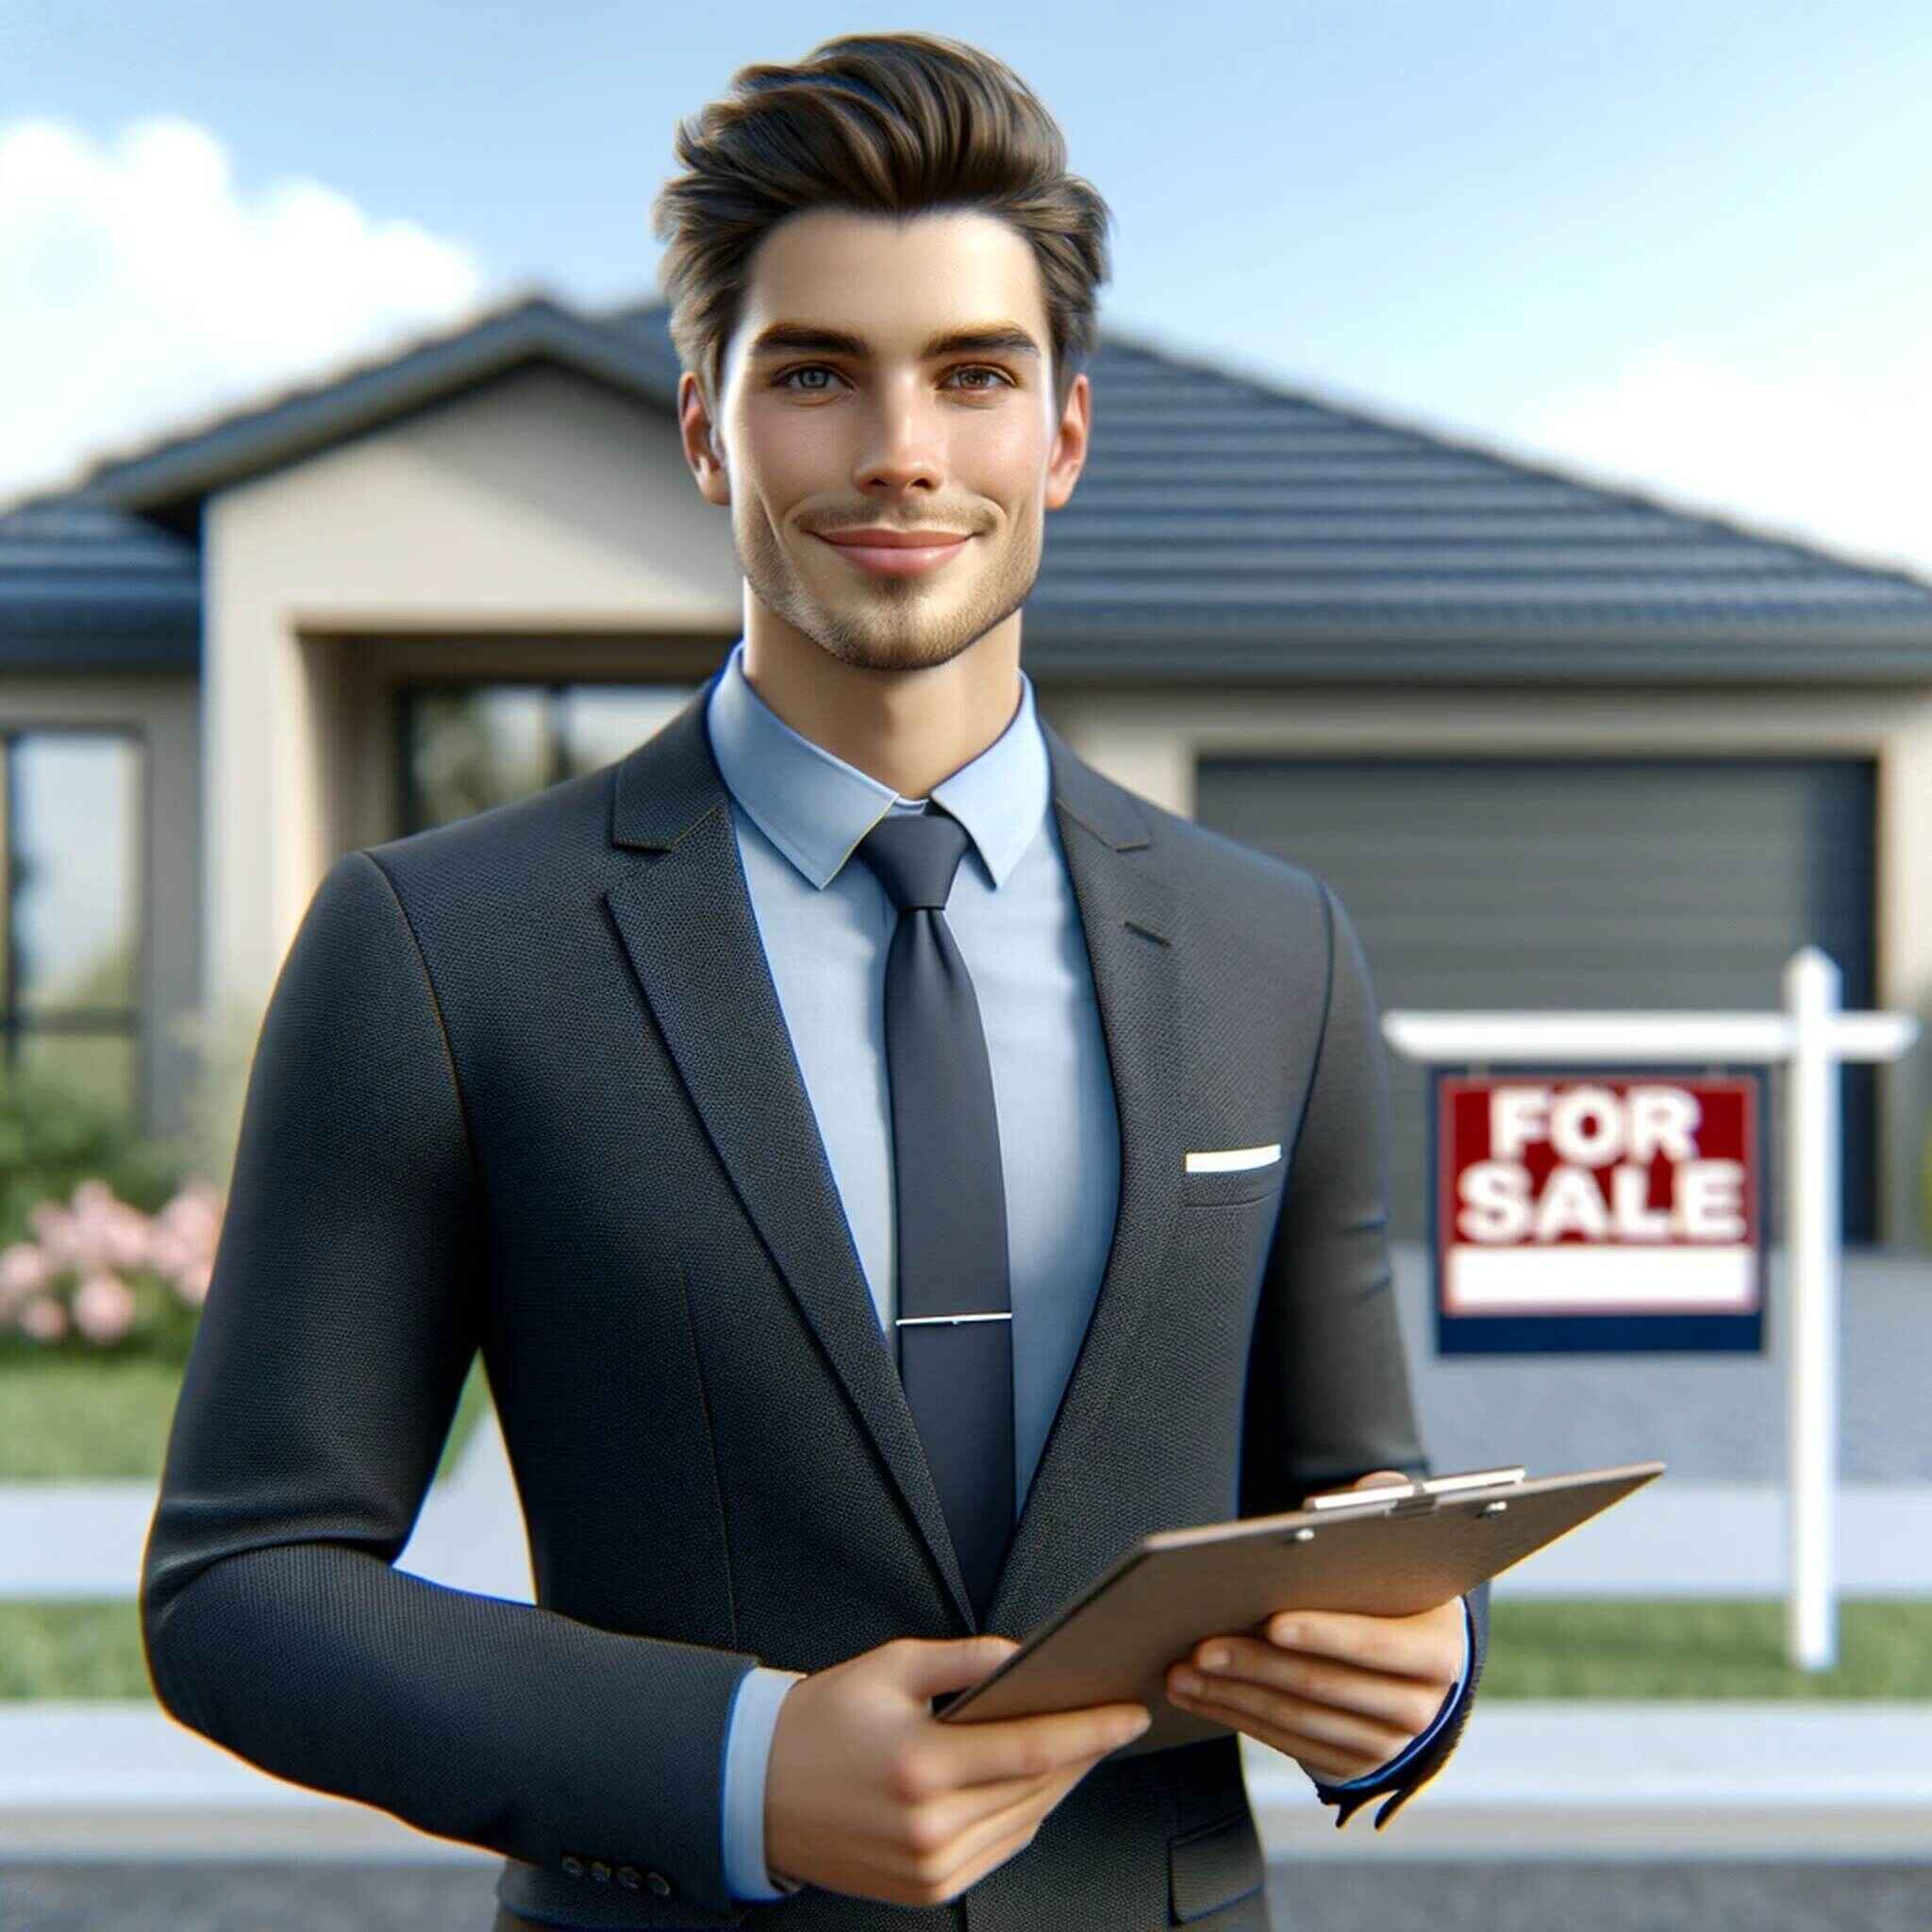 The realtor is standing in front of a property for sale, holding a clipboard and smiling